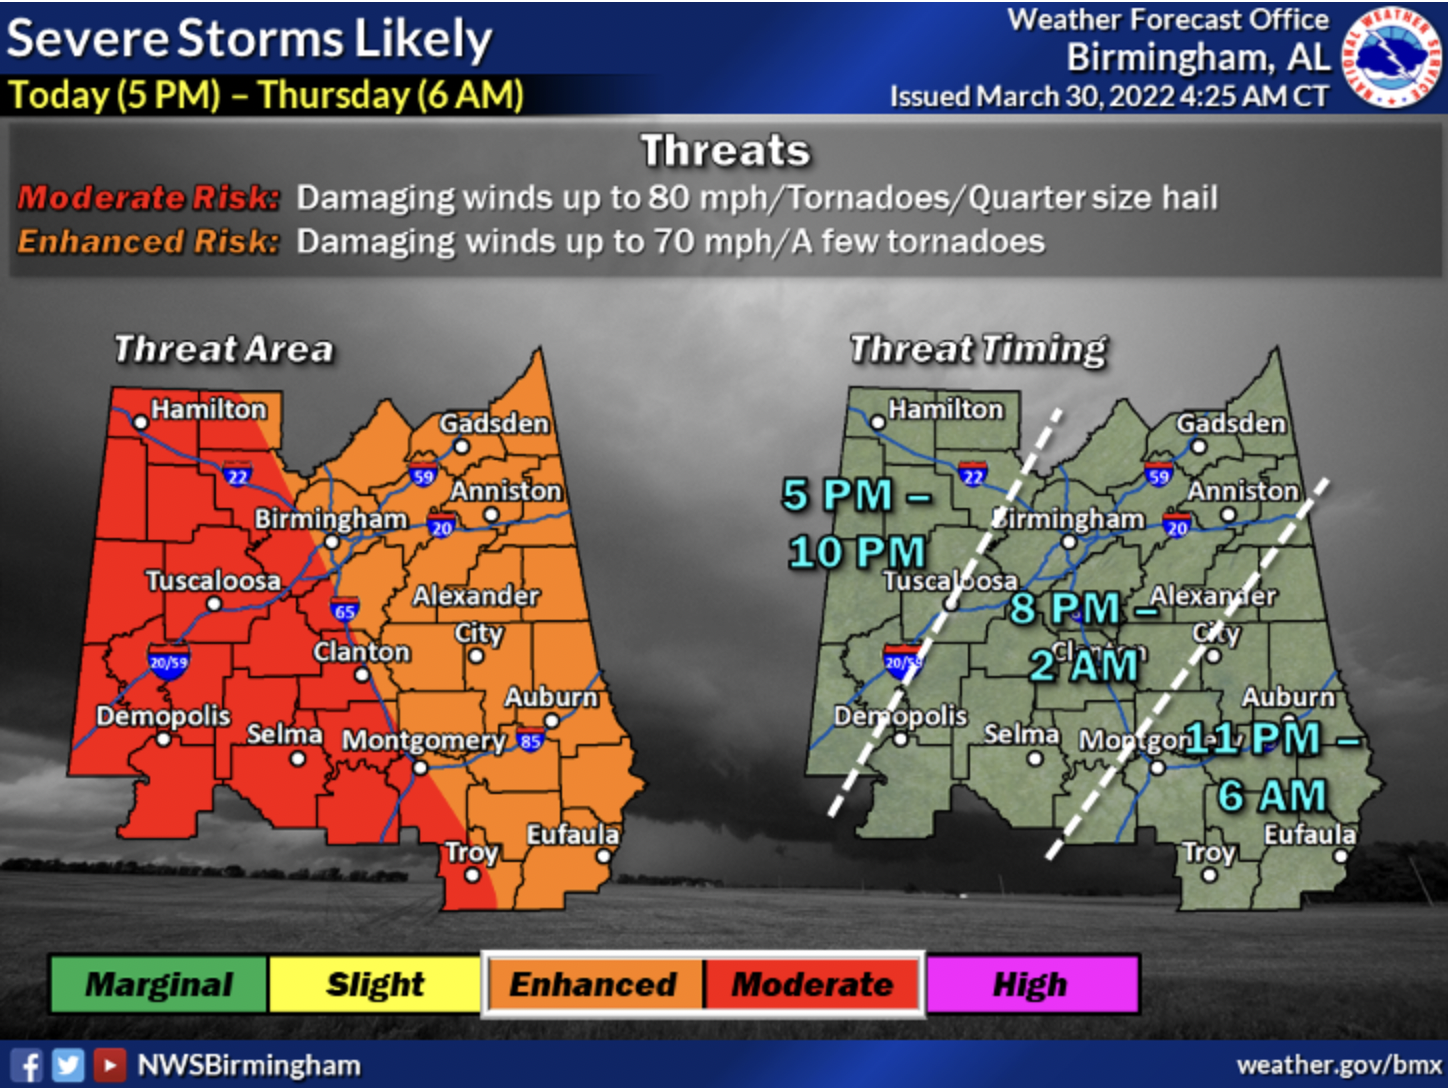 National Weather Service warns of potential hail, flash floods, possible tornadoes tonight